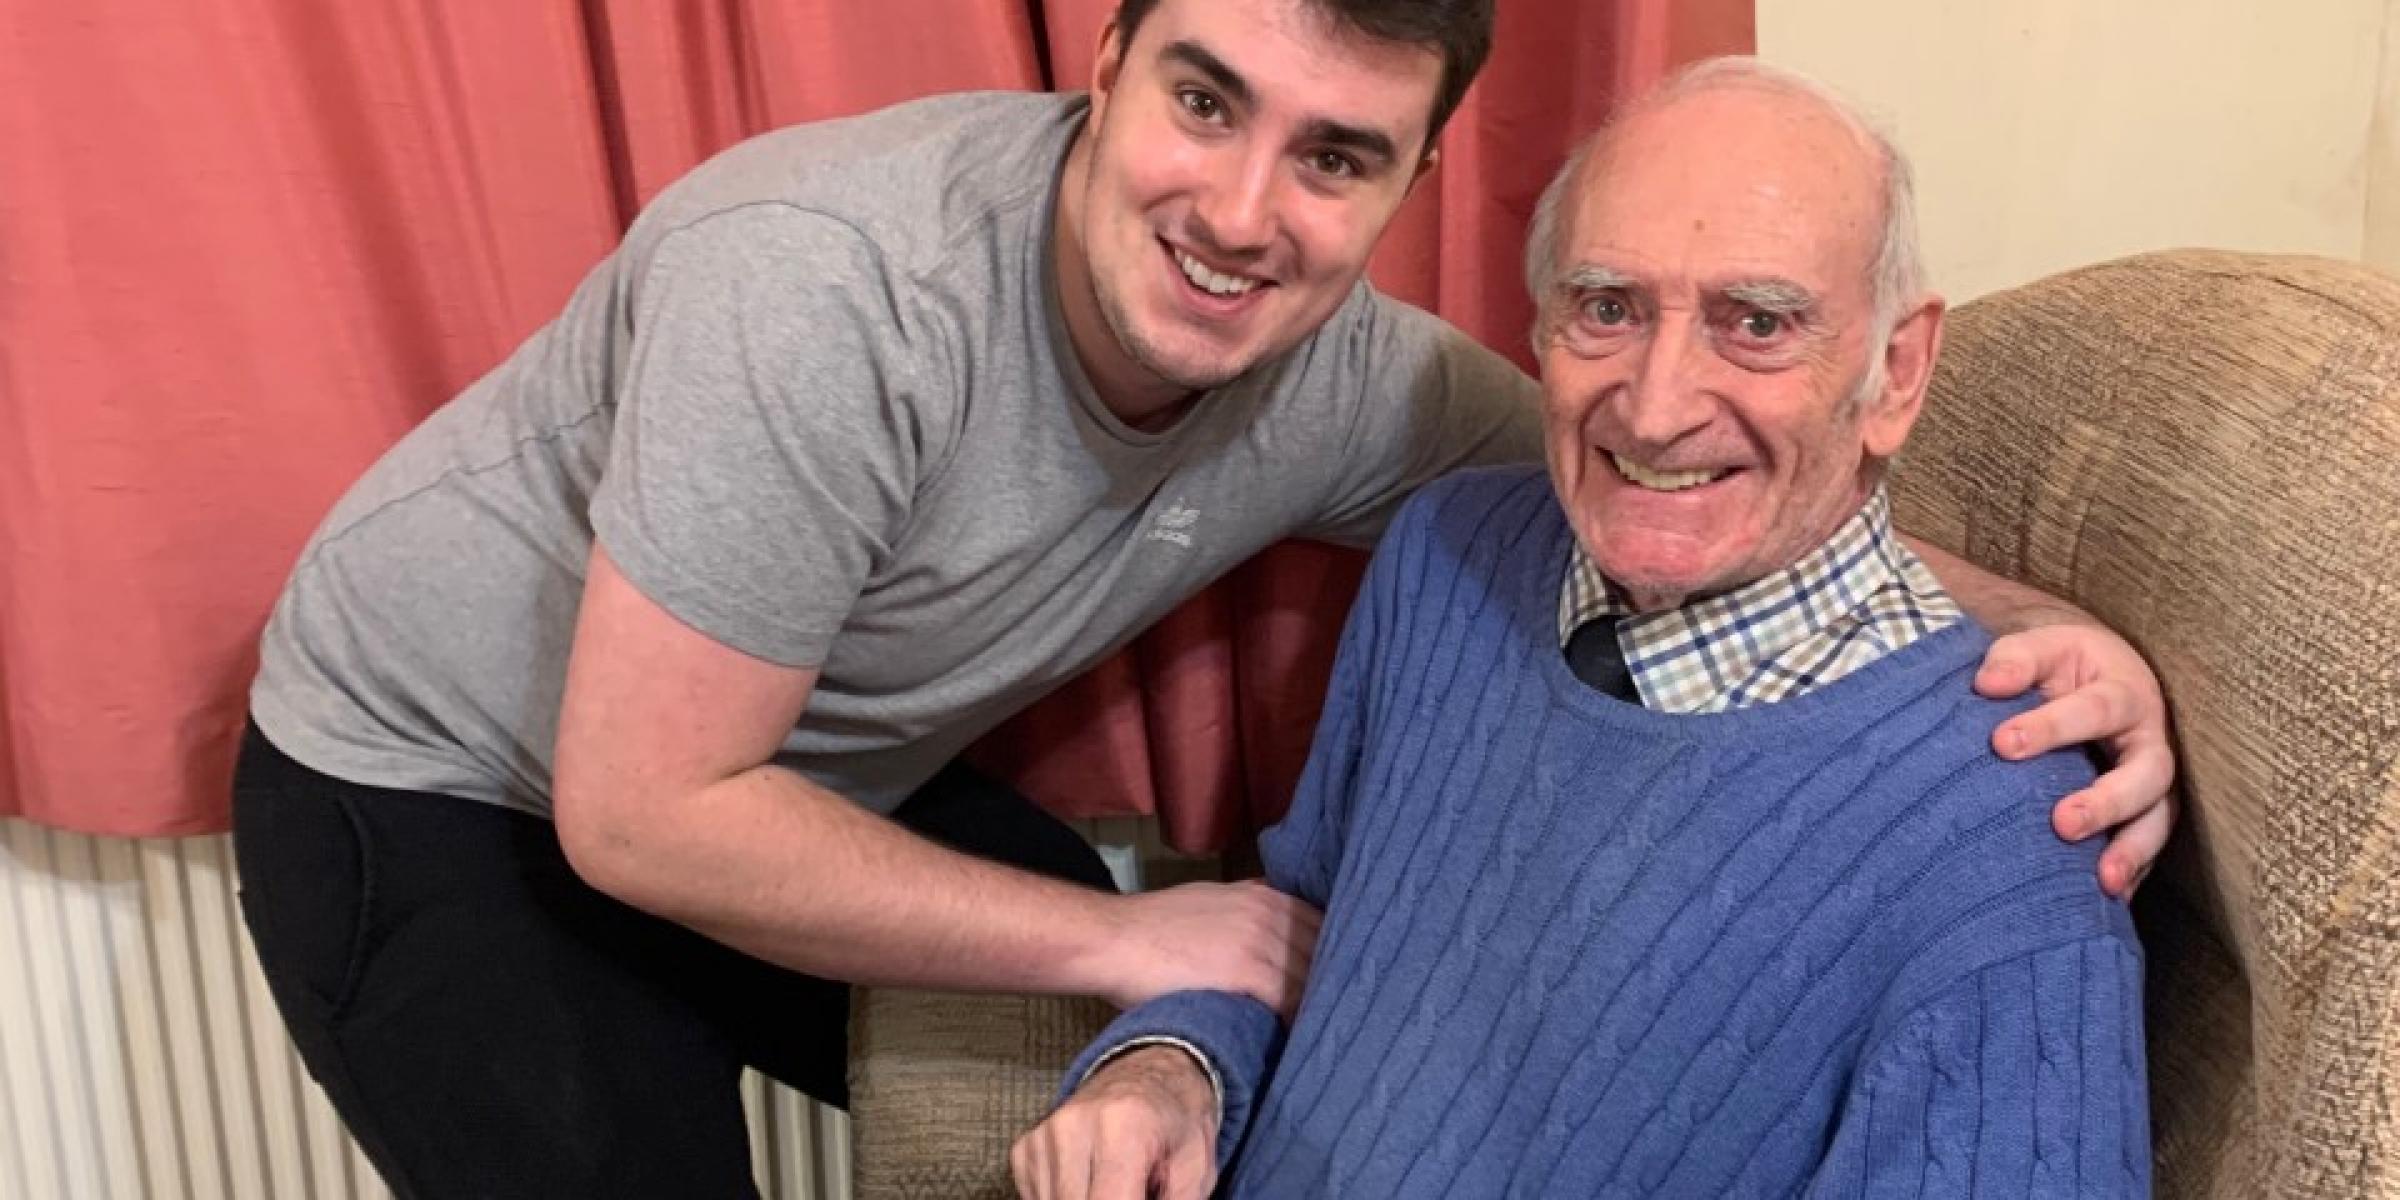 Tom with his grandad, John, before the move into care